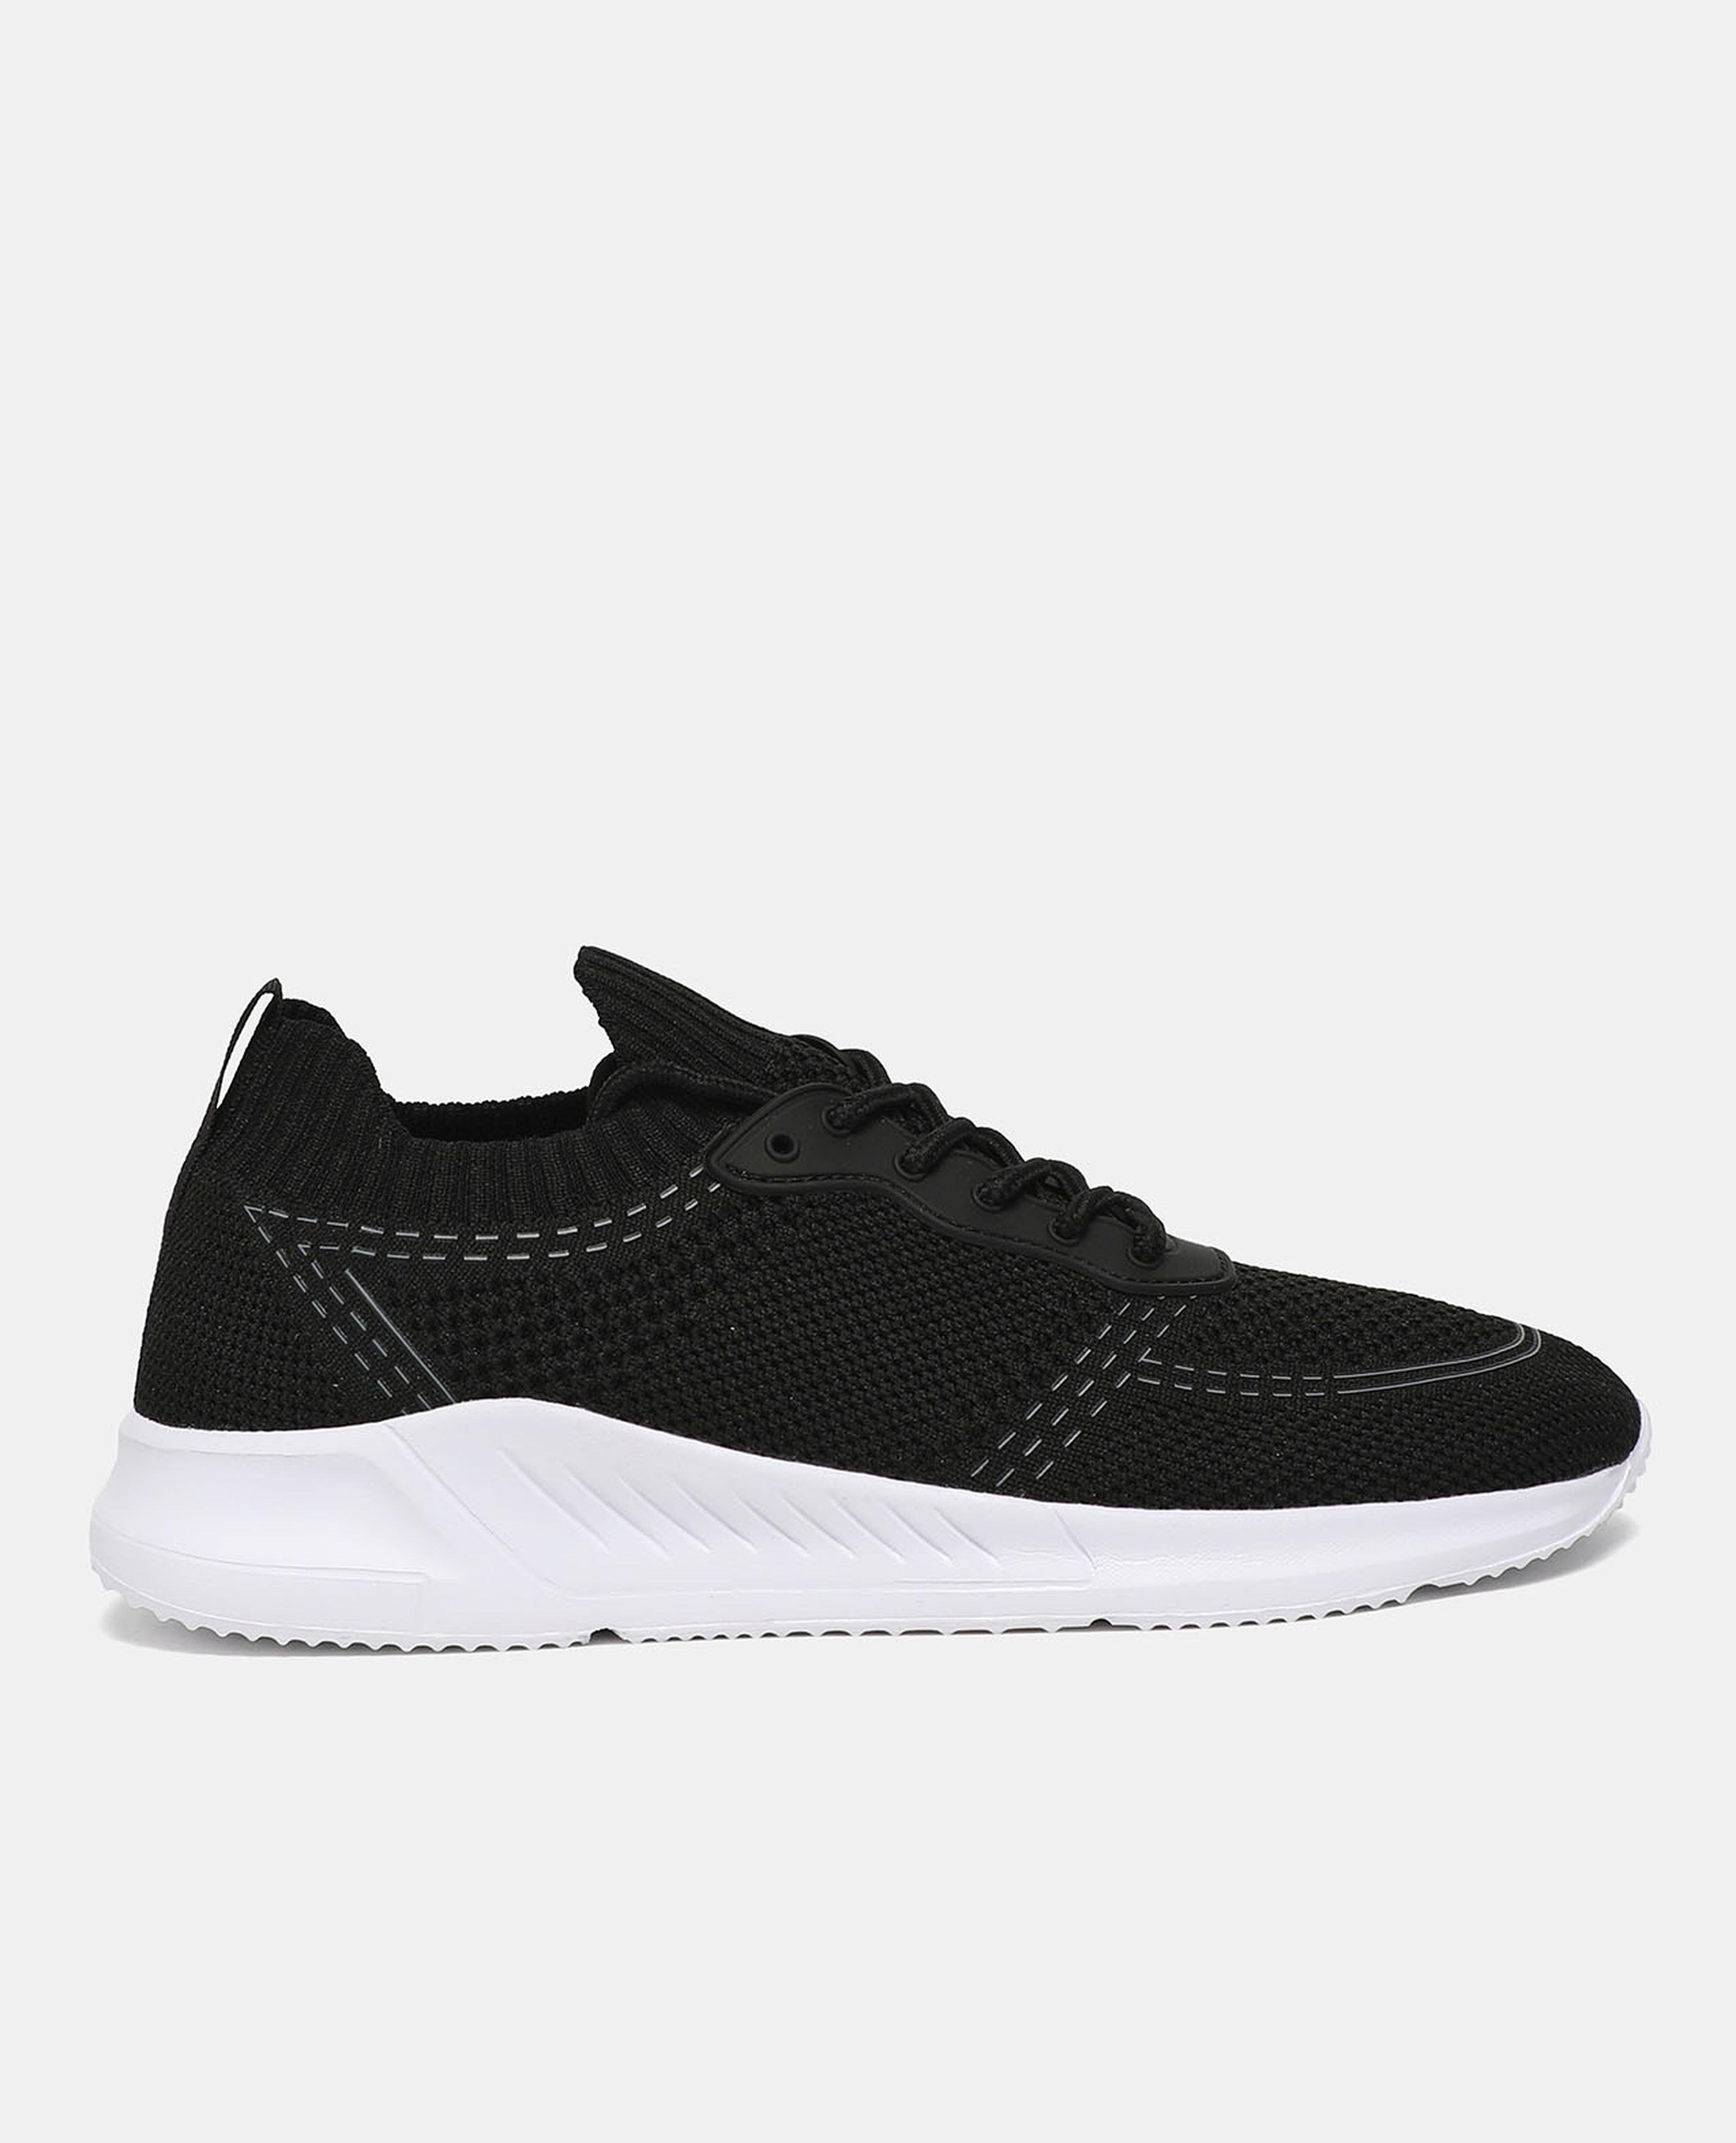 Solid Knit Textured Lace Up Sports Shoes